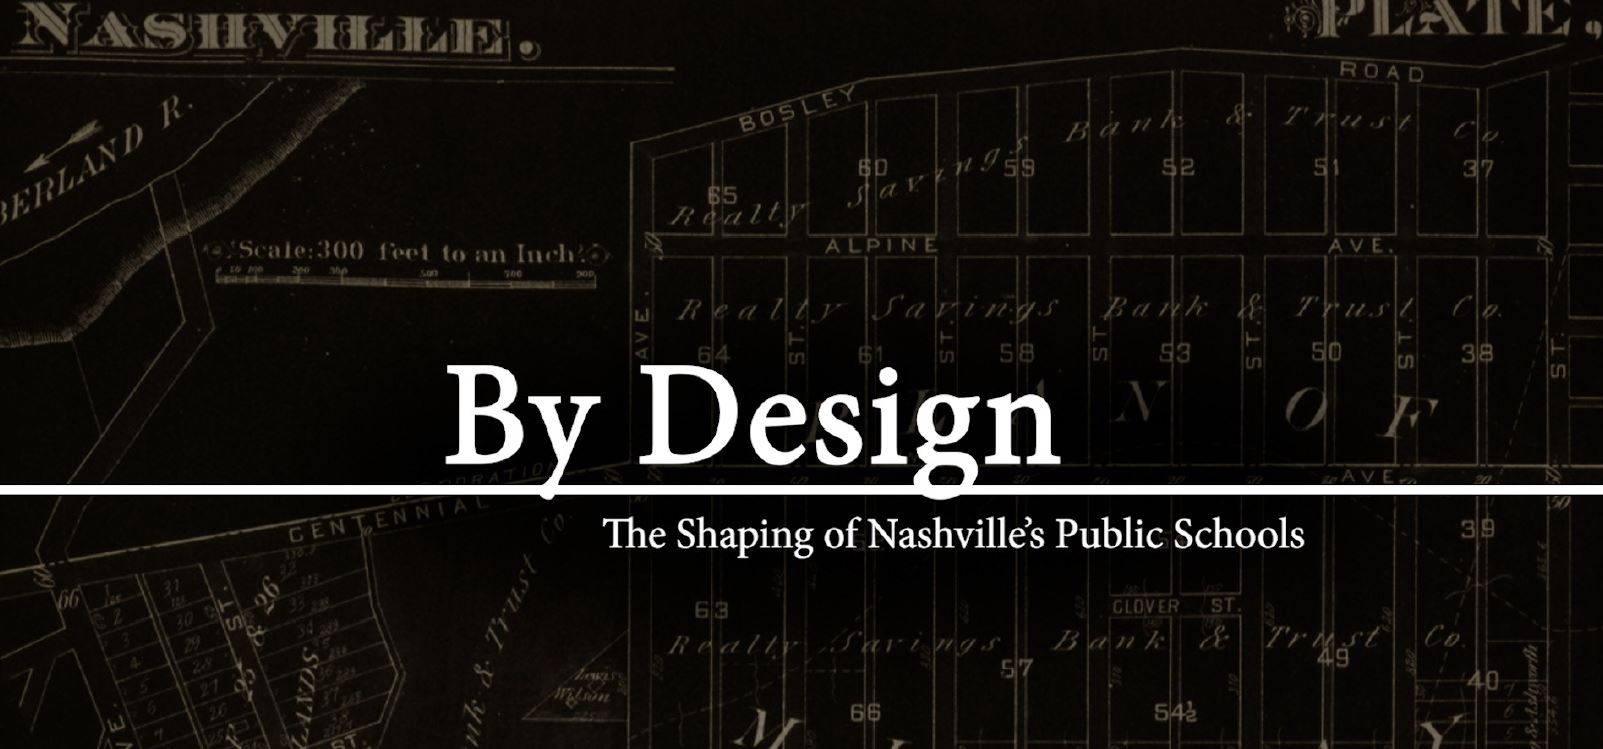 By Design: The Shaping of Nashville's Public Schools